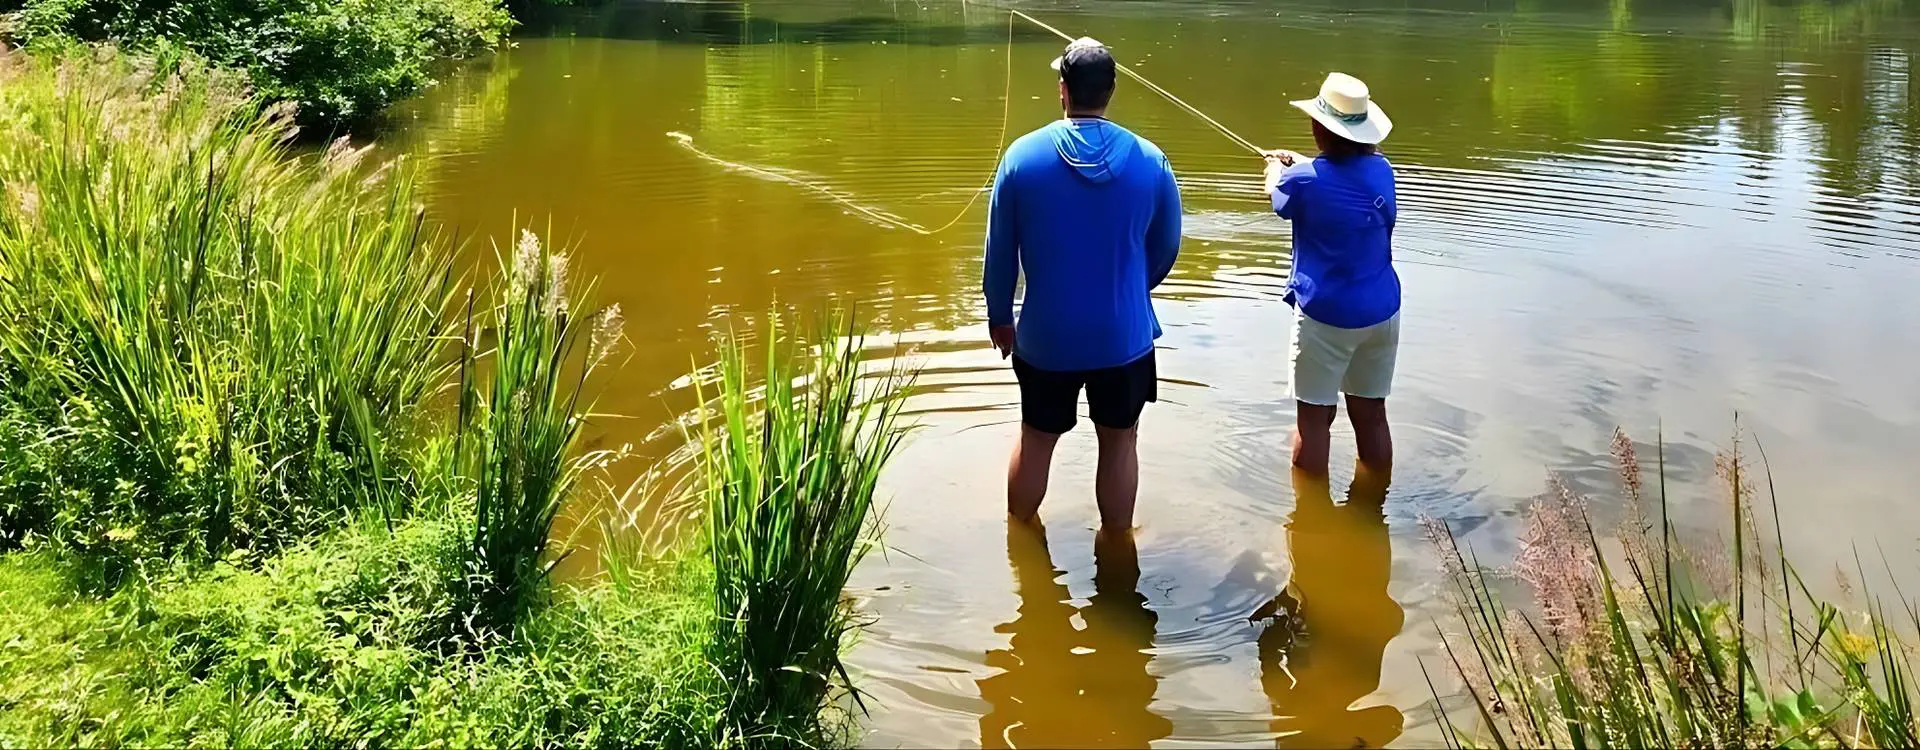 Two people fishing in a body of water